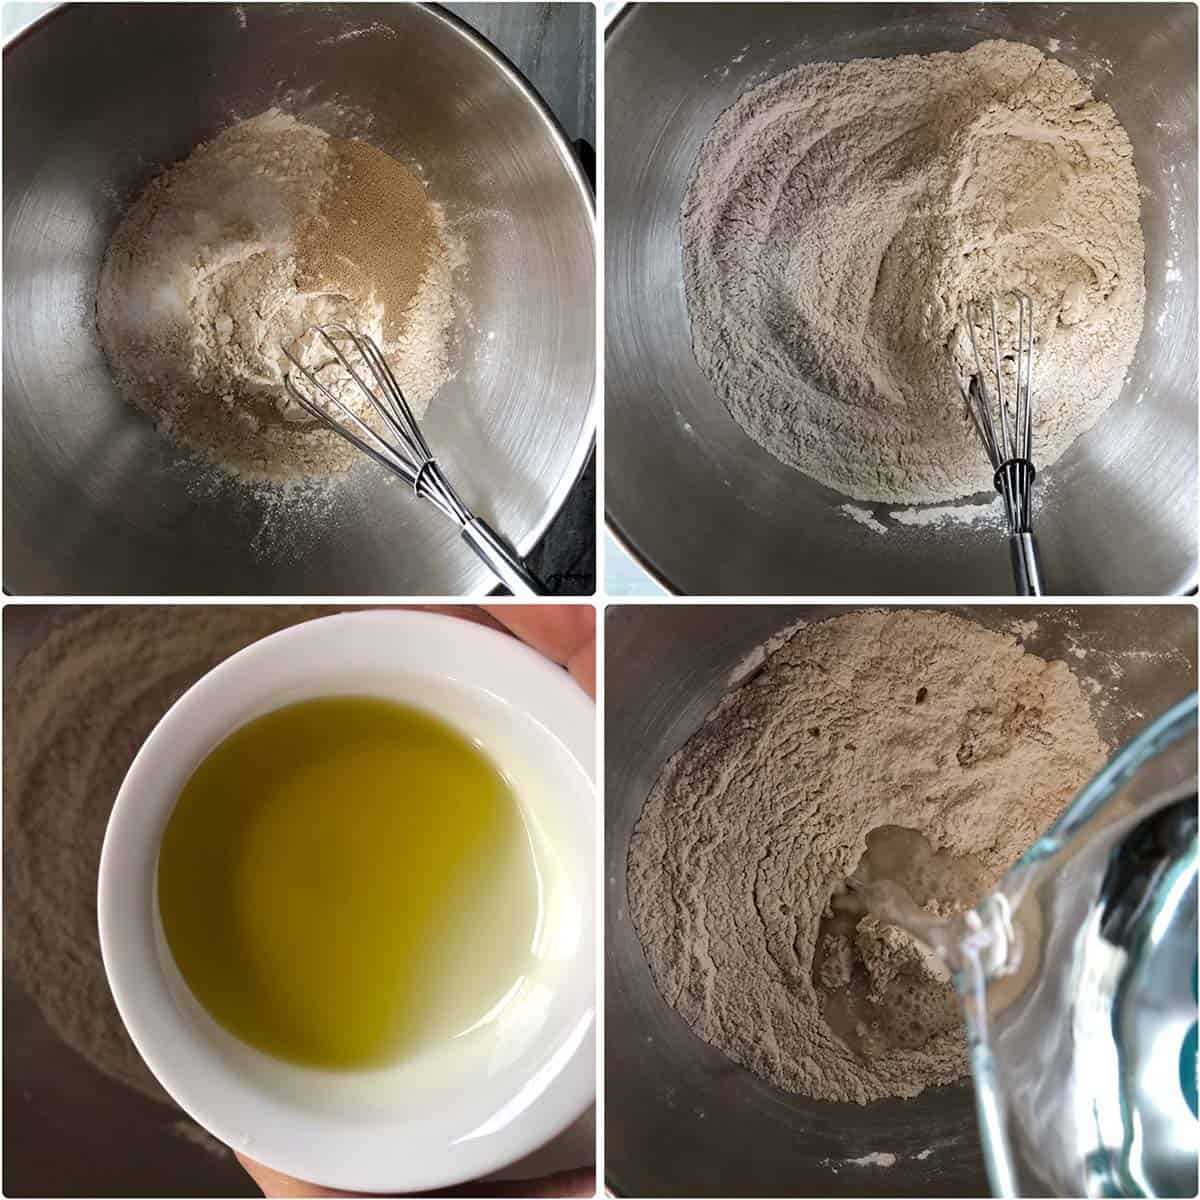 4 panel photo showing the mixing of dough ingredients in steel bowl.